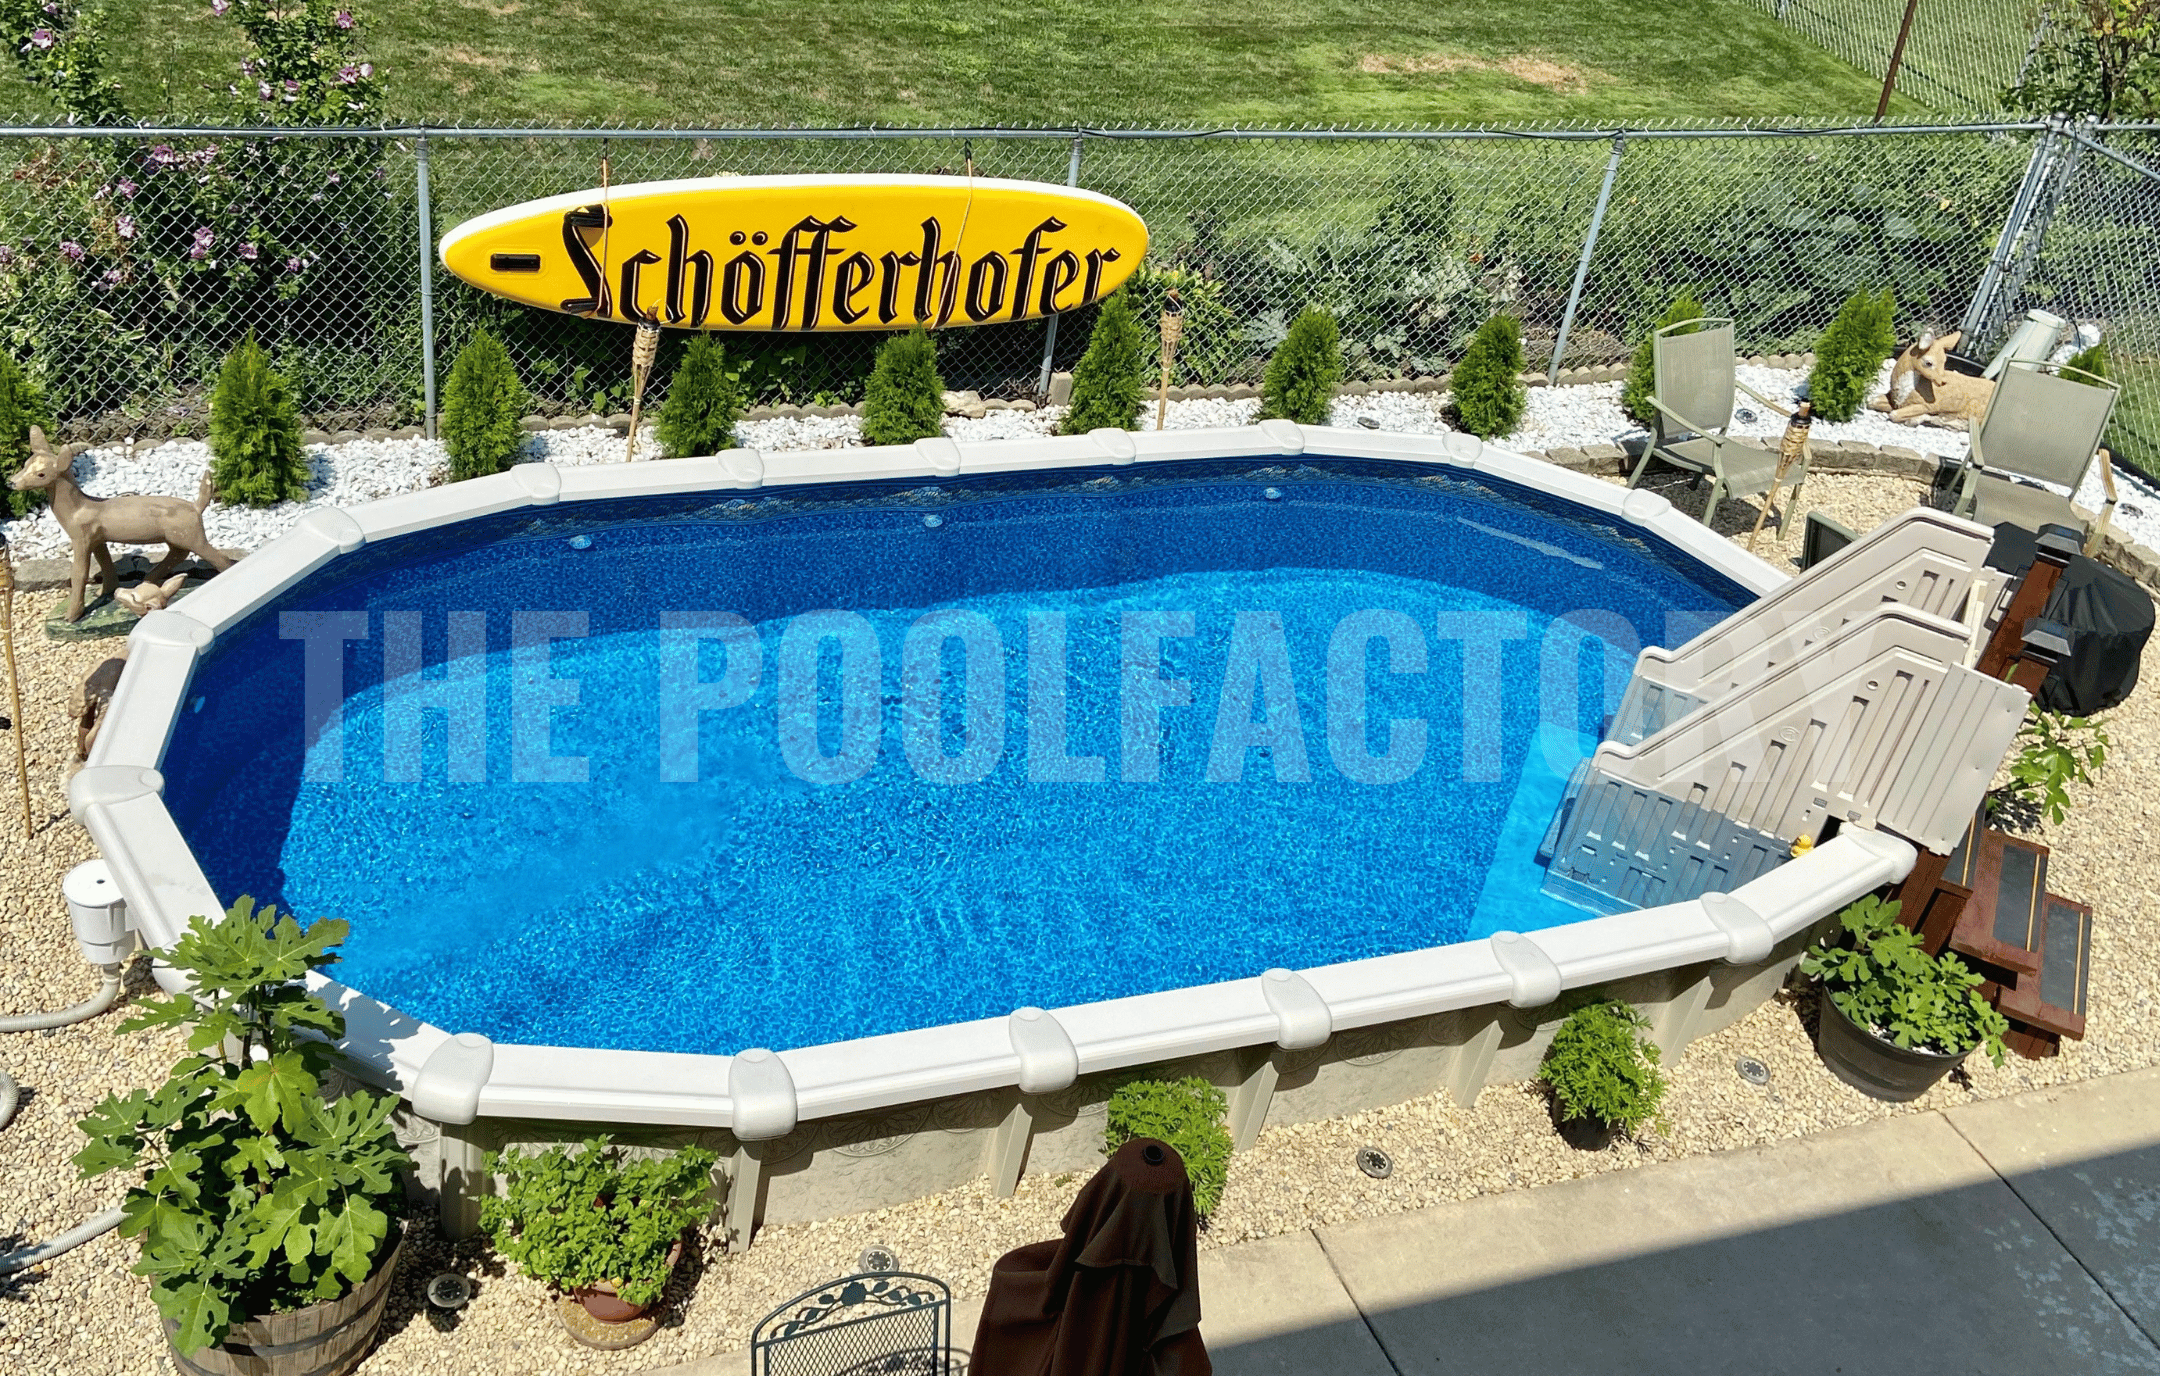 the-fun-factor-above-ground-pool-games-activities-hampton.png__PID:6a5bf8a7-8e98-4985-a1e3-6f2ad7327012